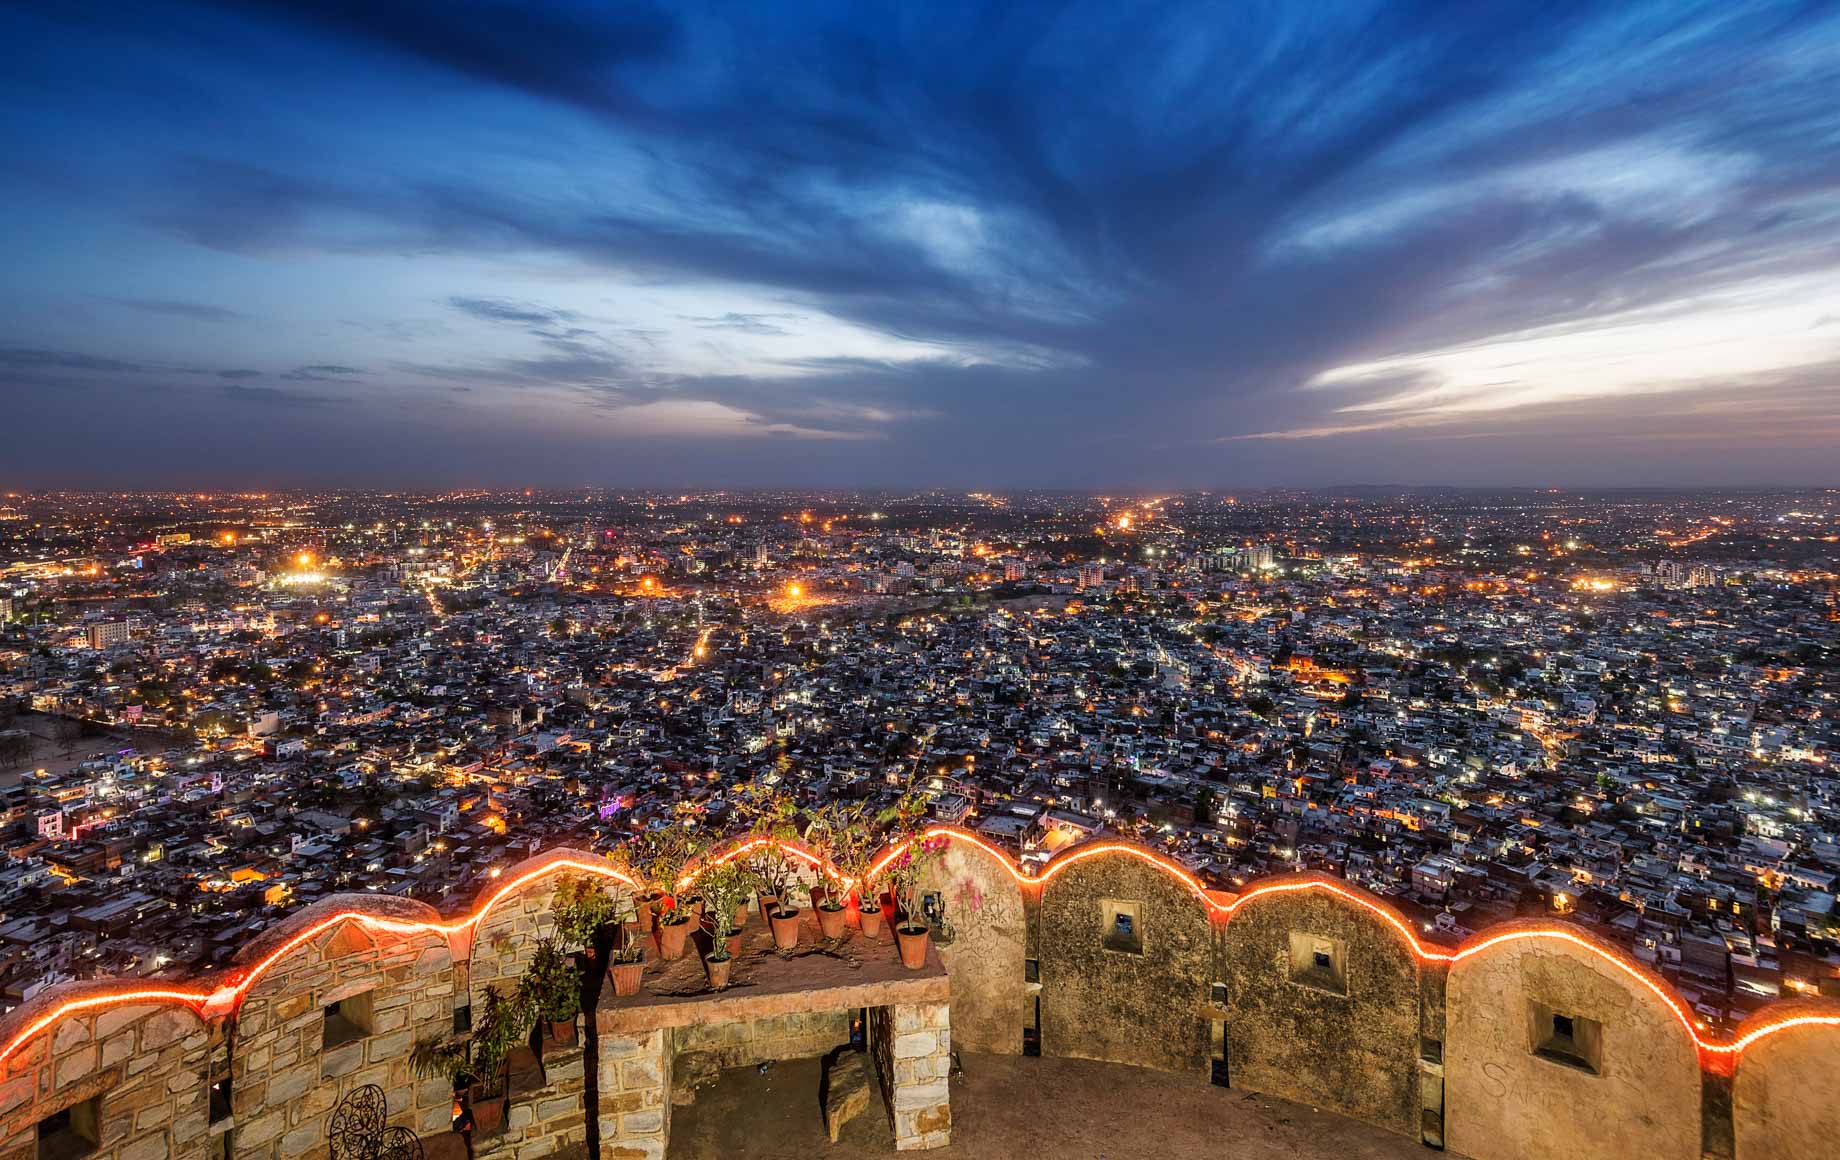 Jaipur night view from the top